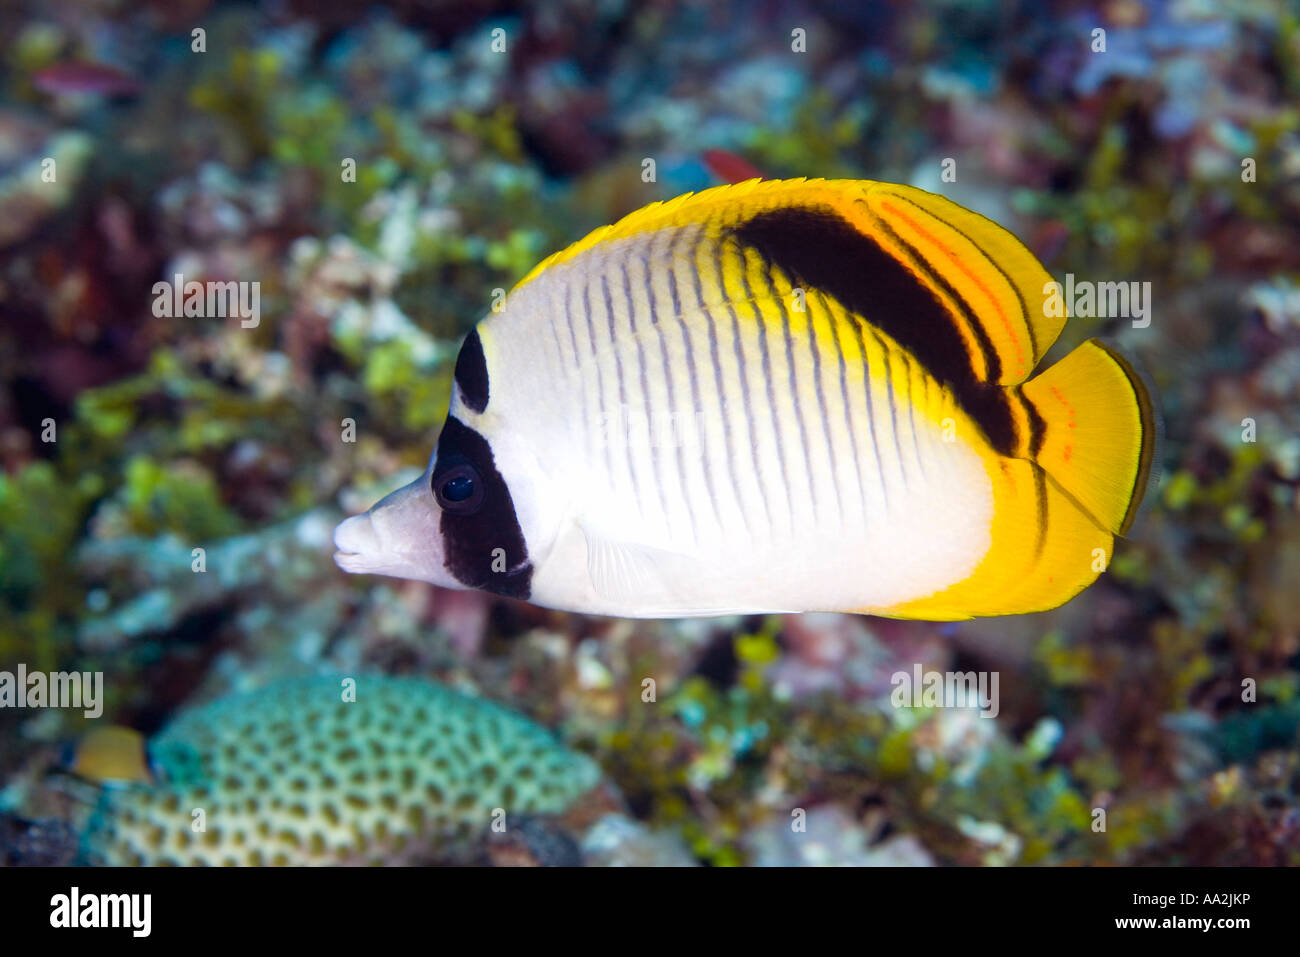 Spot-Nape or Pig Face Butterflyfish, Chaetodon oxycephalus, swimming over coral reef Stock Photo